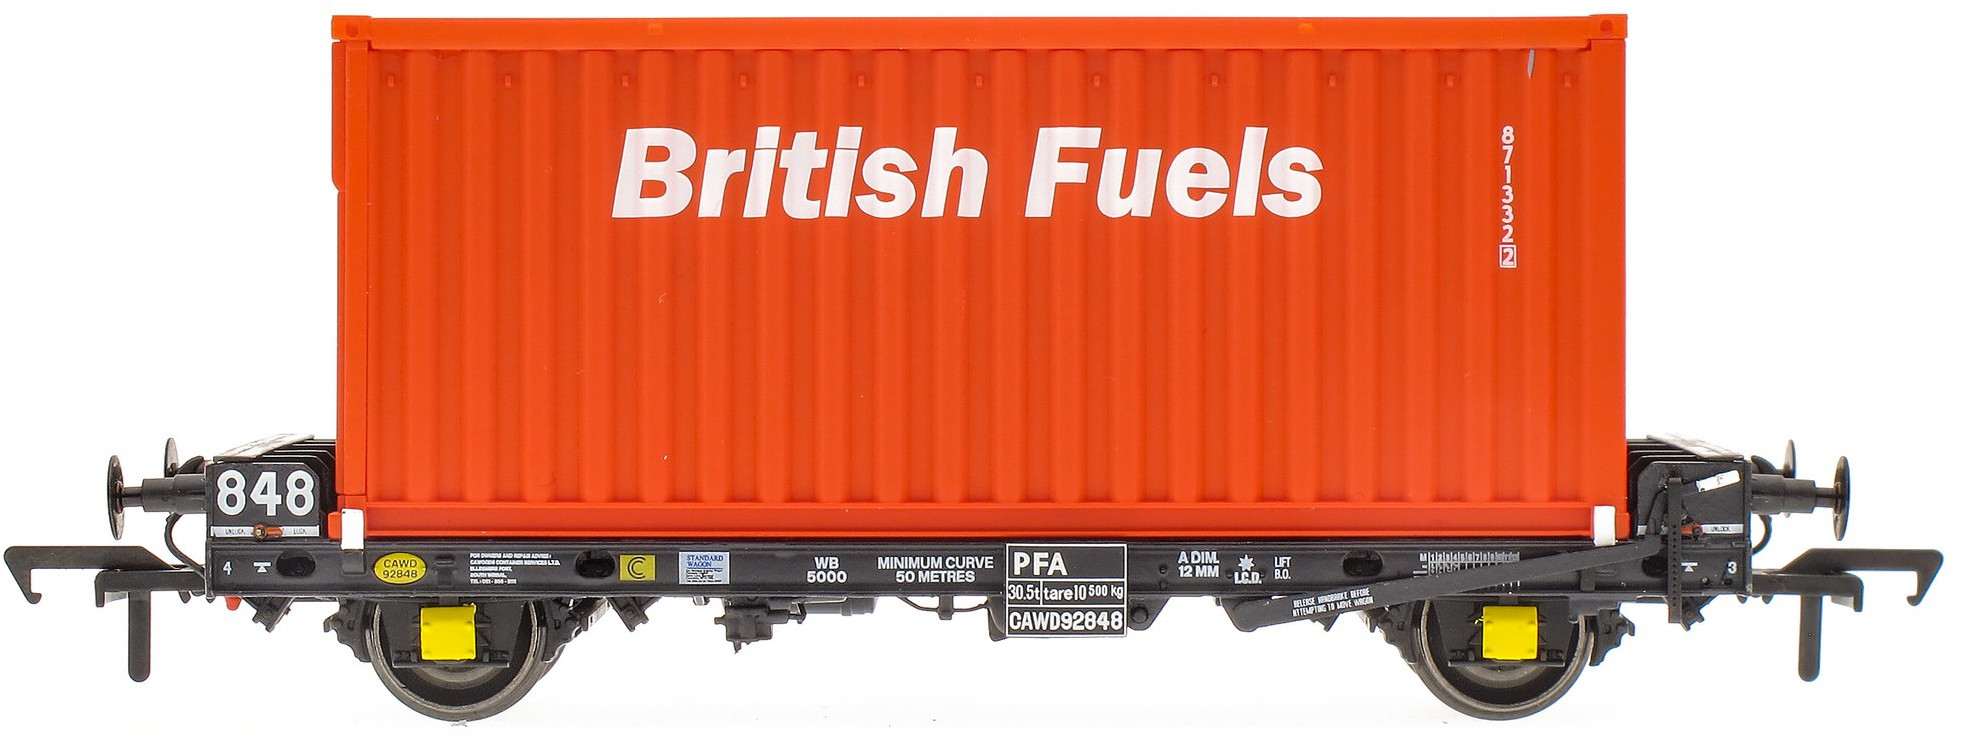 Accurascale ACC2068BFLH Flat British Fuels BFL92848 Image